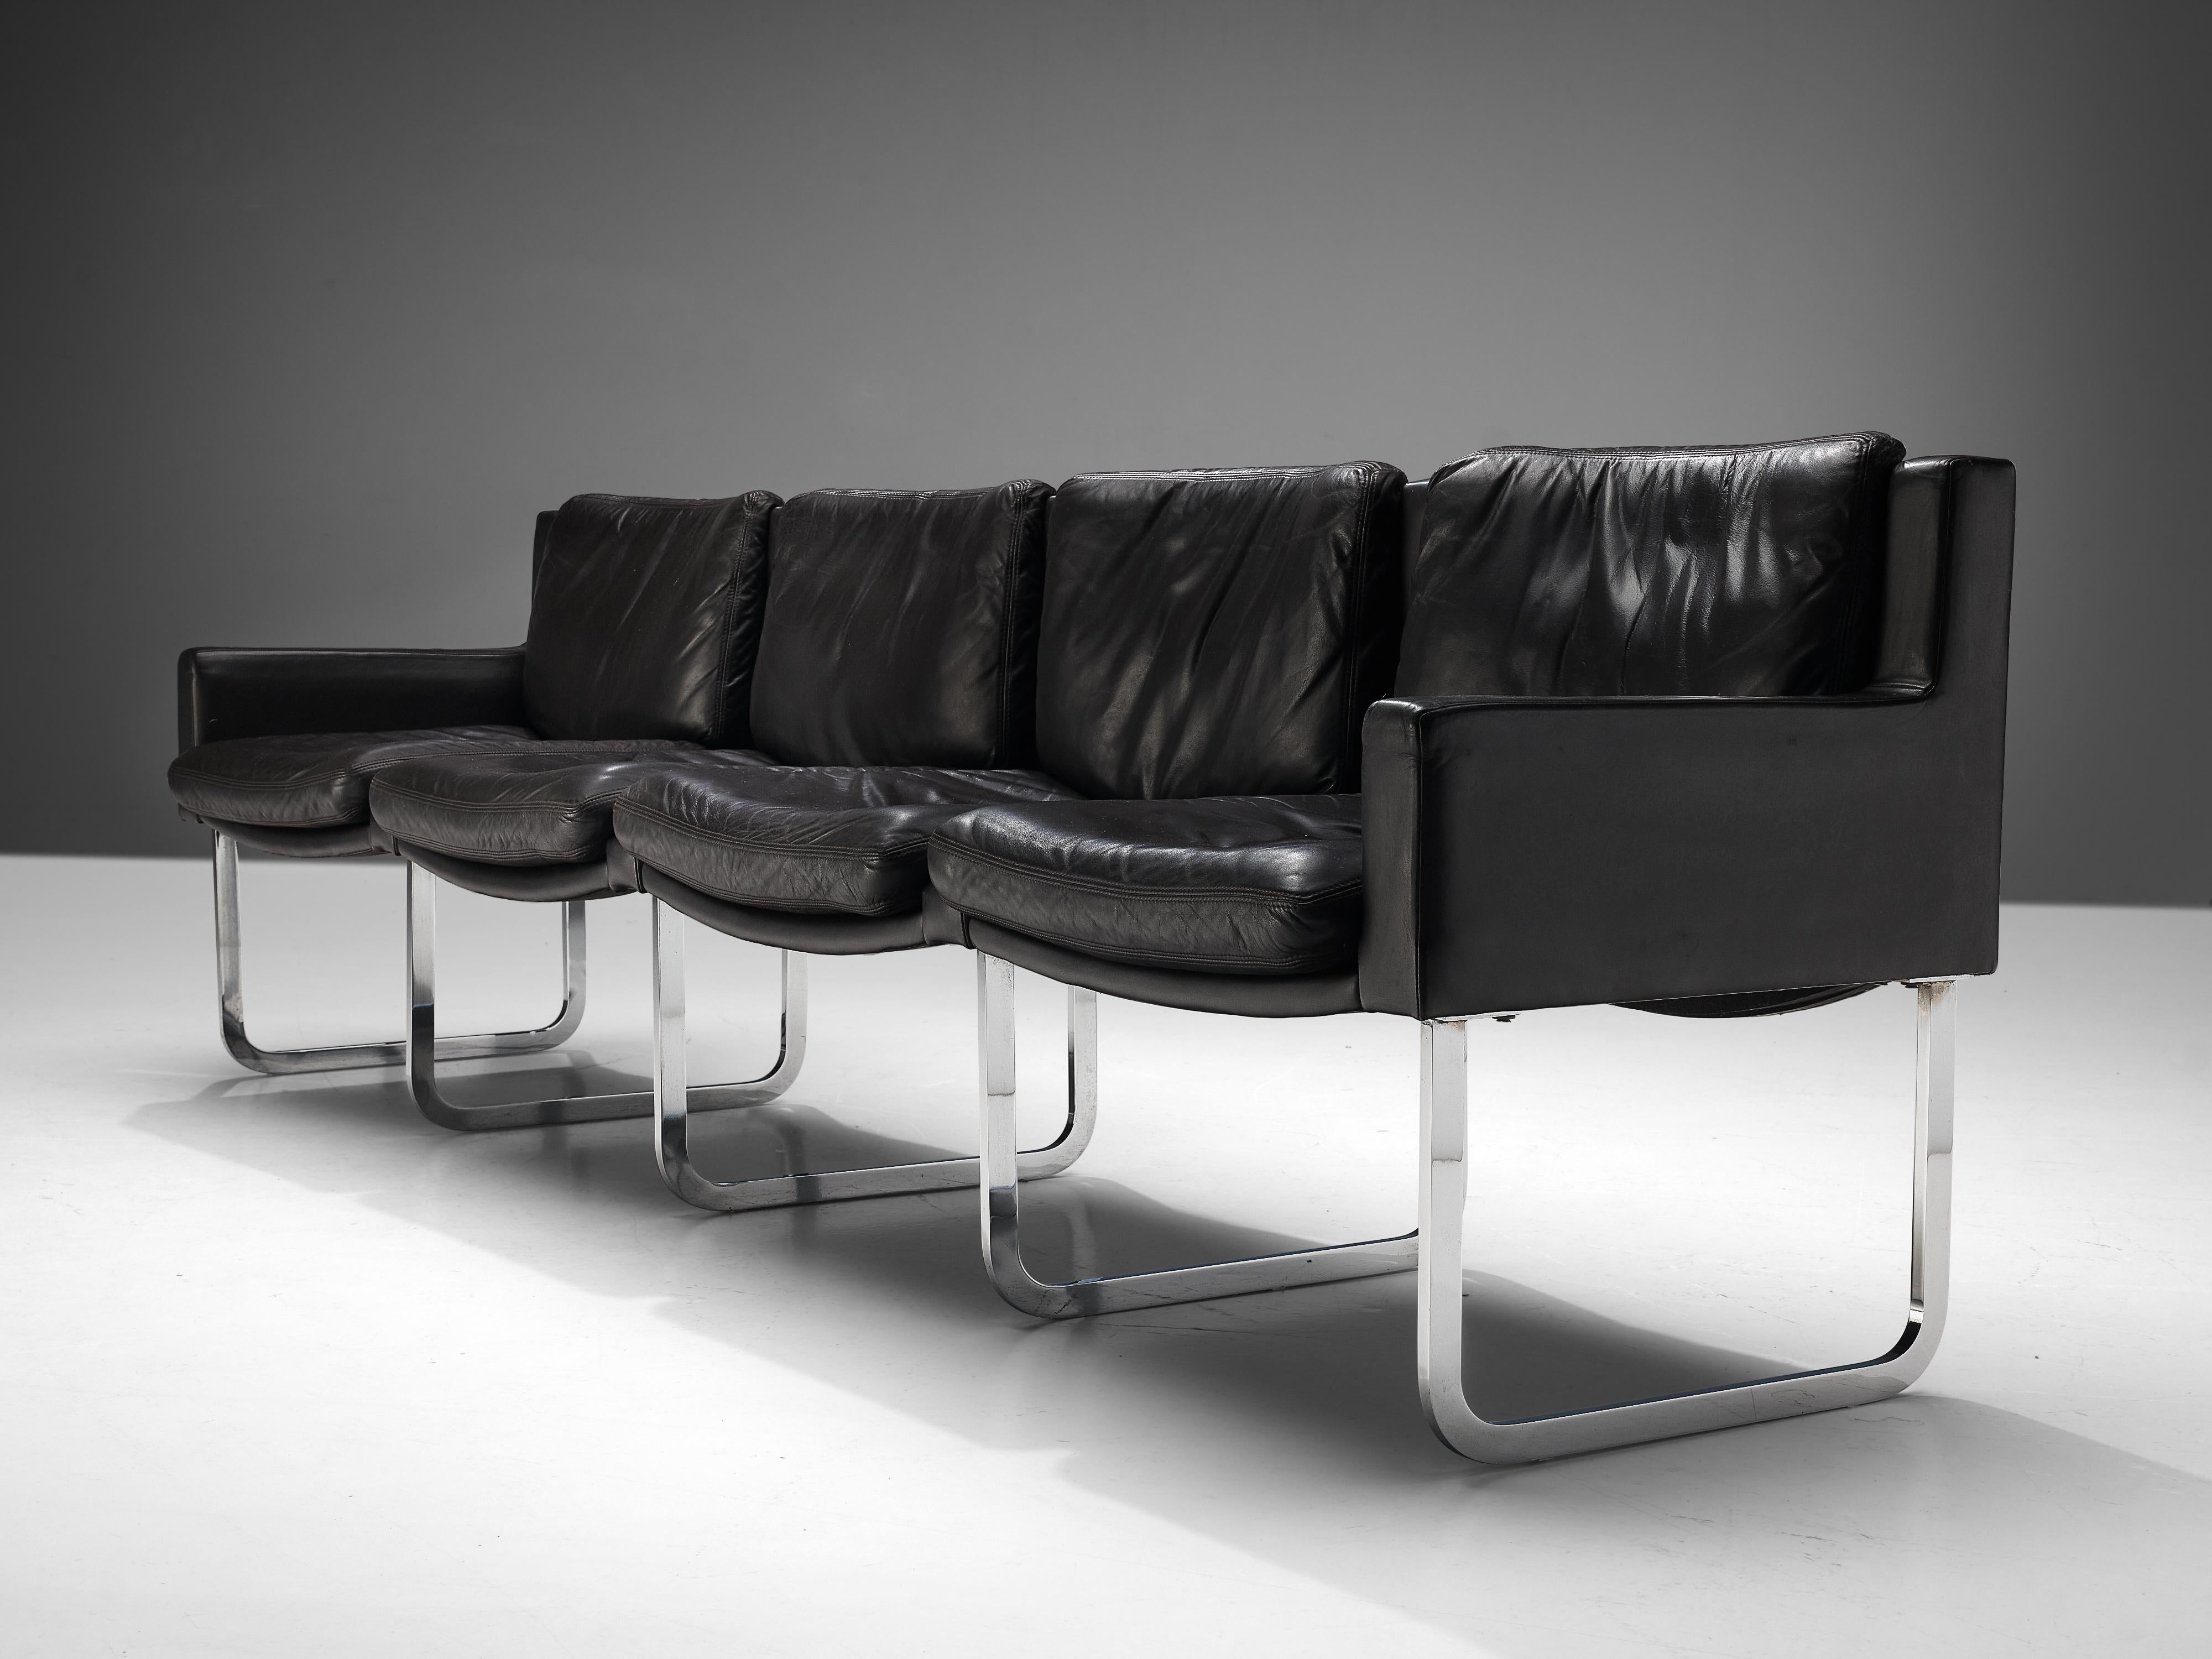 Metal Elegant Four-Seat Sofa in Black Leather and Steel